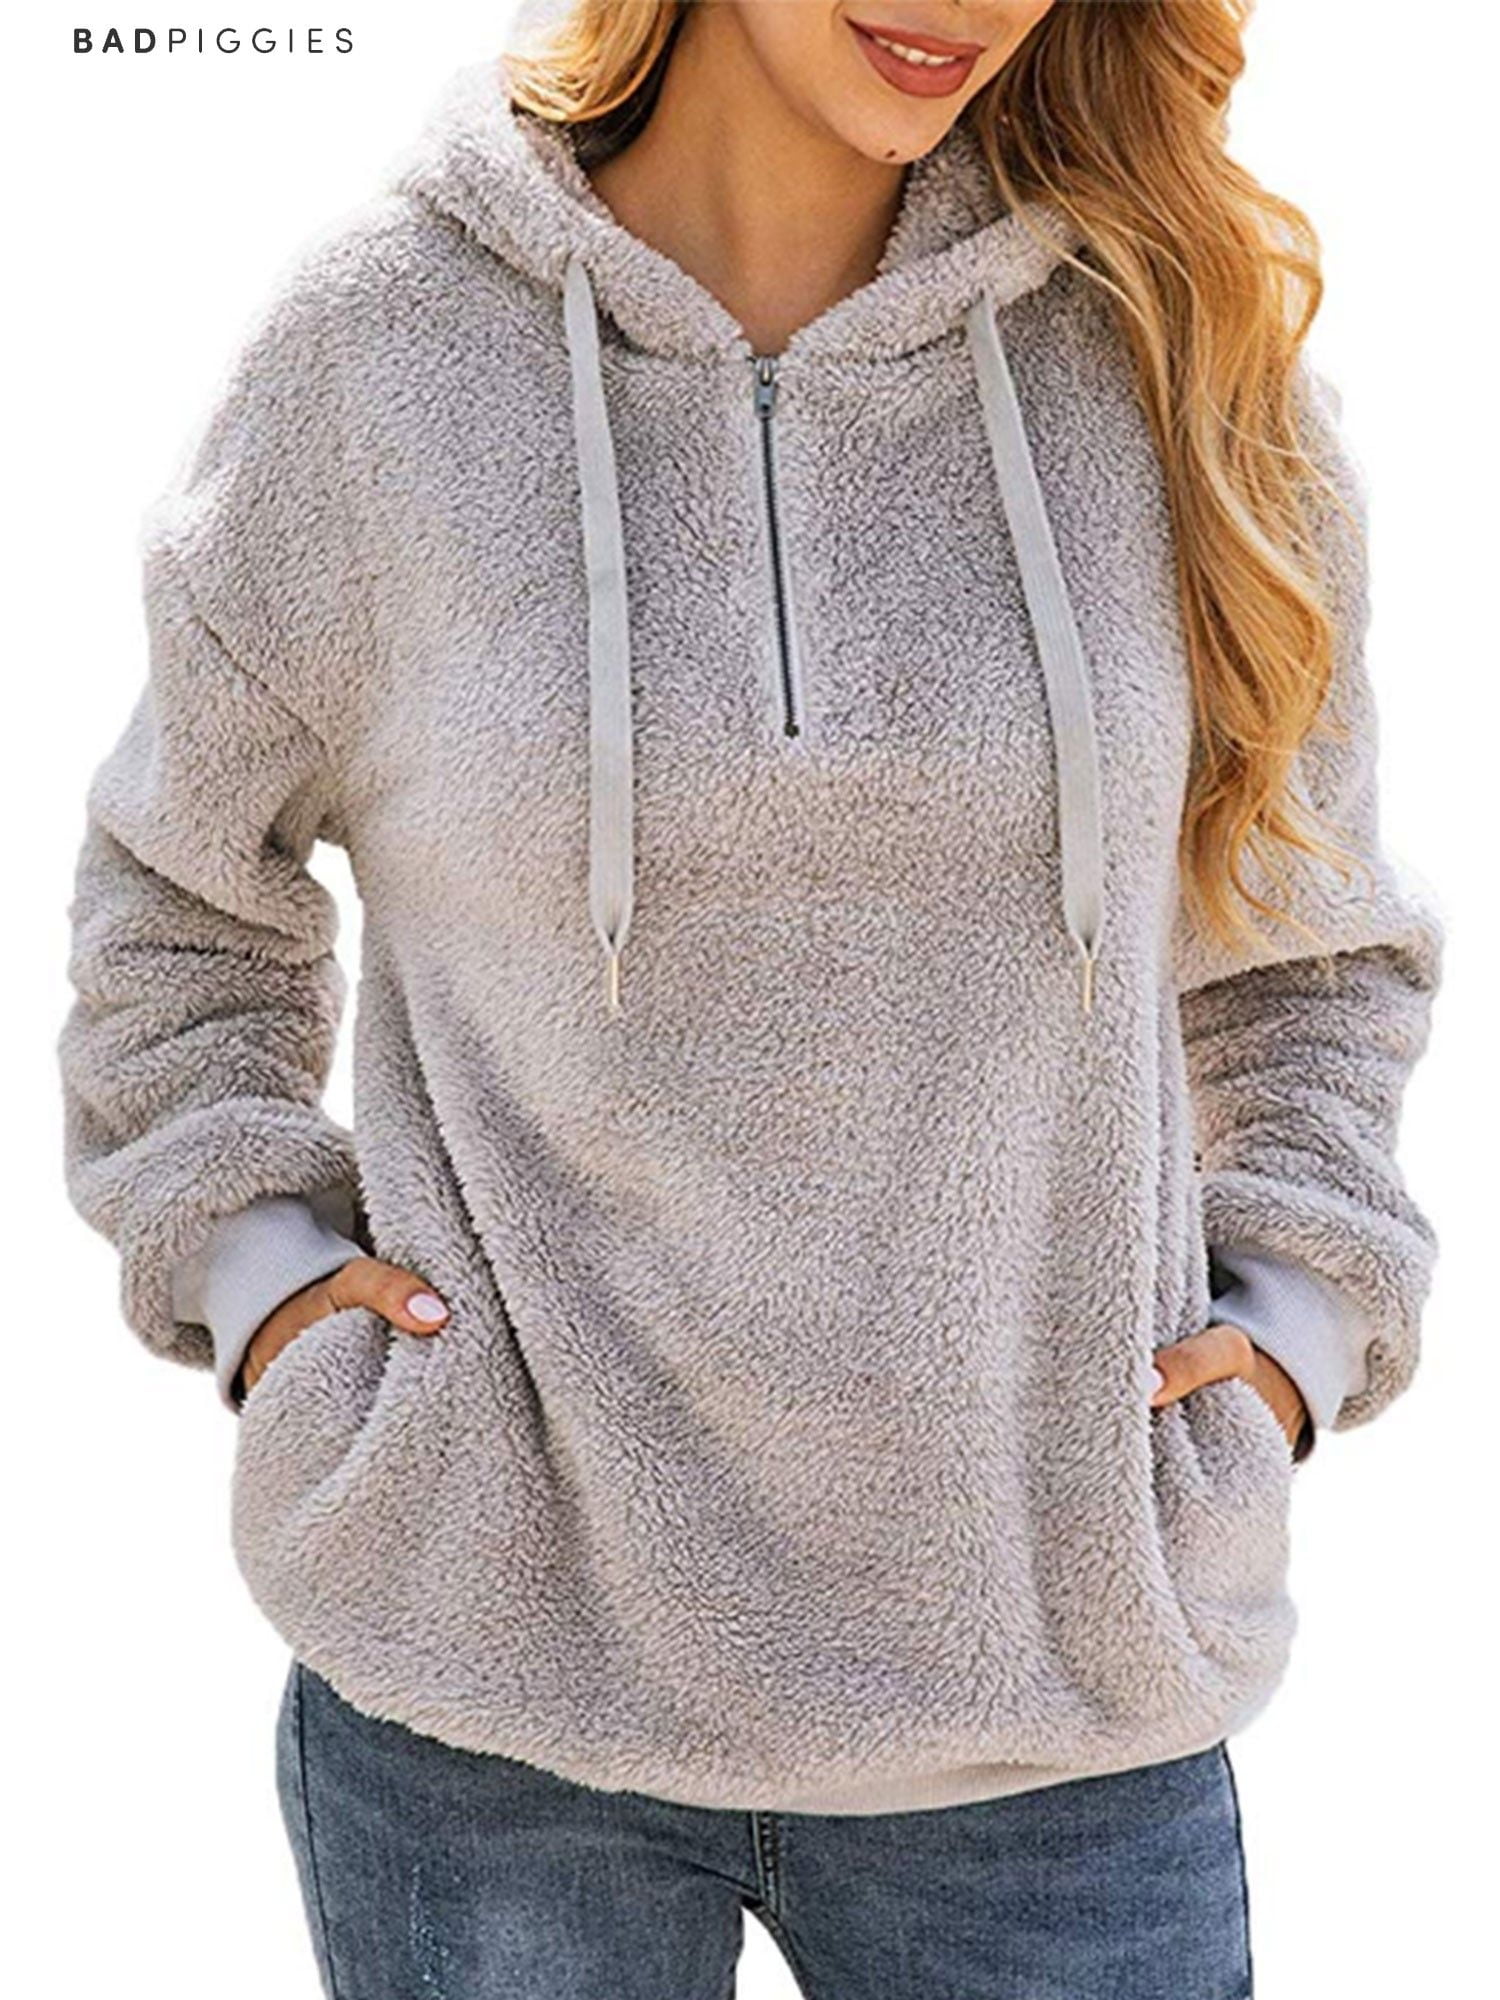 Bwiv Womens Baggy Fluffy Pullover Hoodie with 1/4 Zipper and Drawstring for Winter Ladies Long Sleeves Sweatshirt Soft Tops Teddy Fleece 